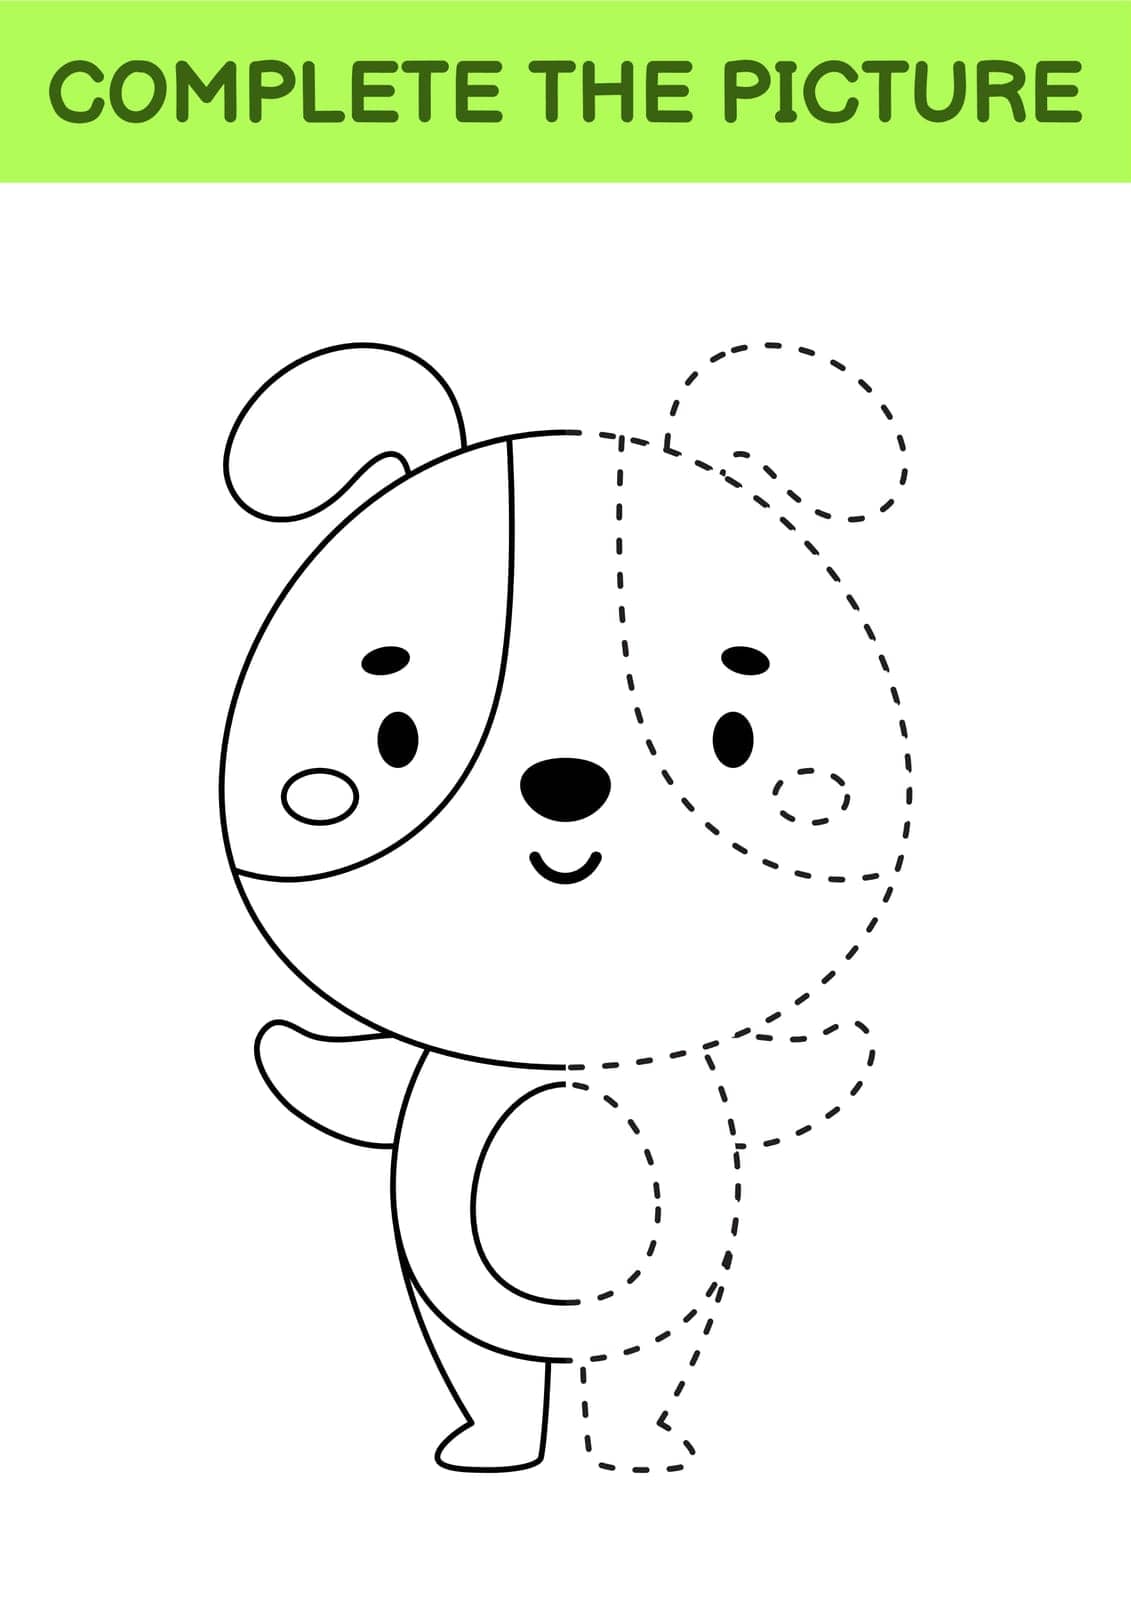 Complete drawn picture of cute dog. Coloring book. Dot copy game. Handwriting practice, drawing skills training. Education developing printable worksheet. Activity page. Vector illustration by Melnyk